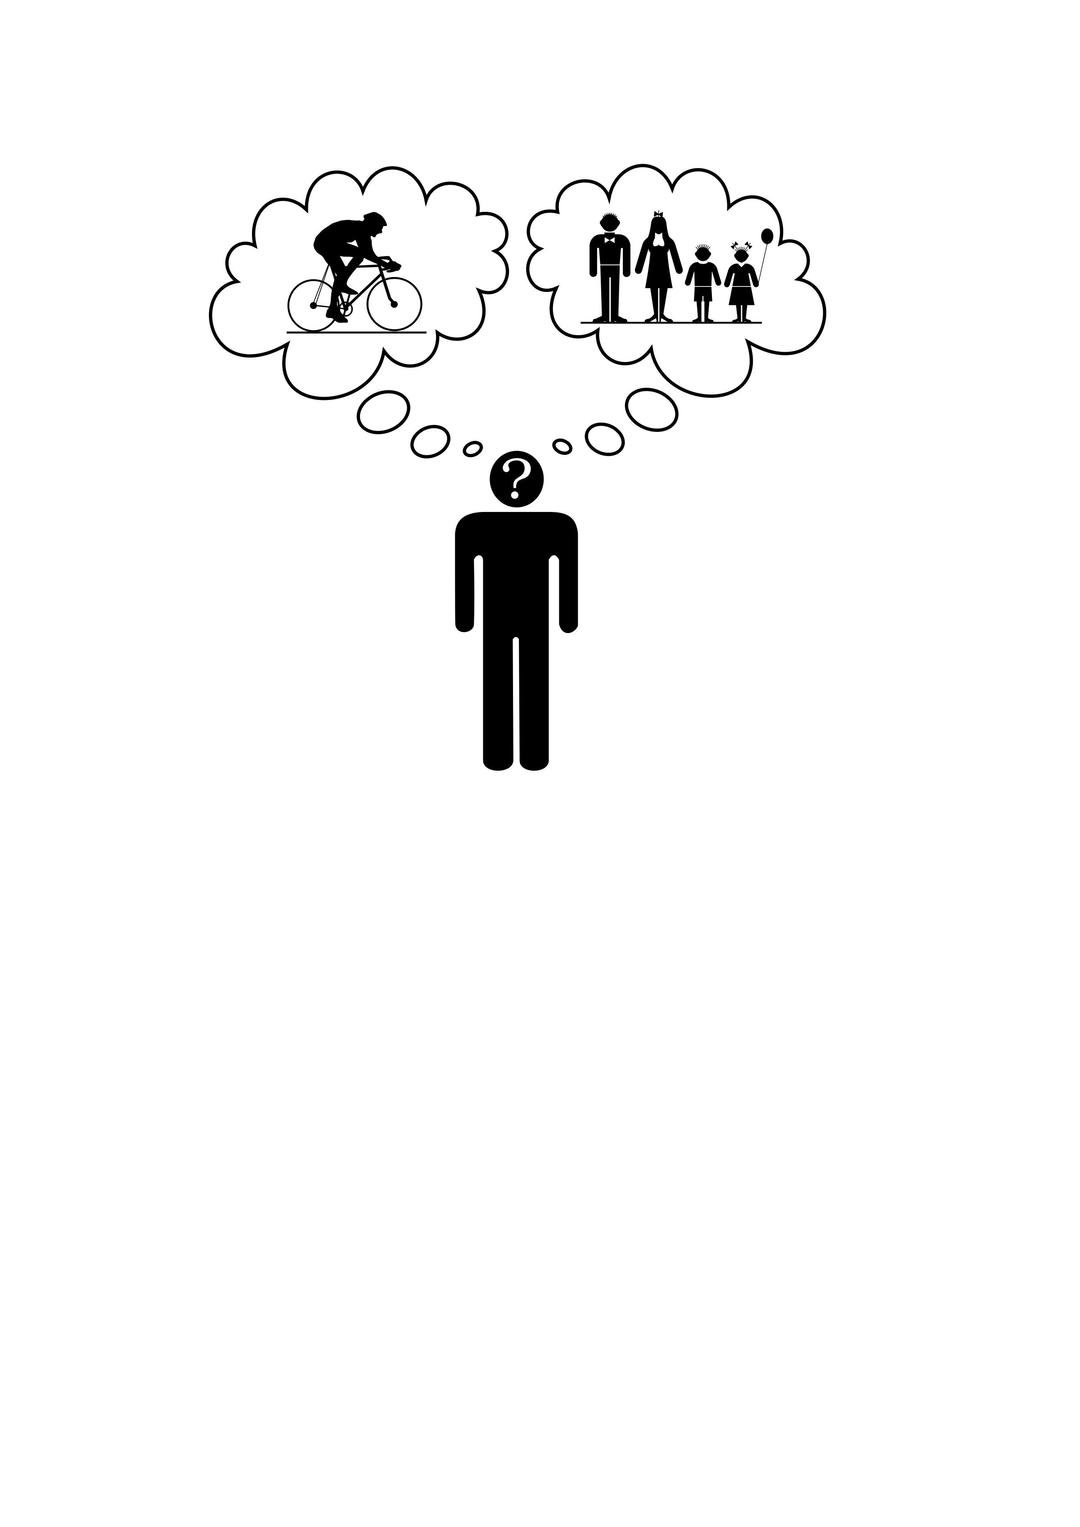 Cycling versus family png transparent